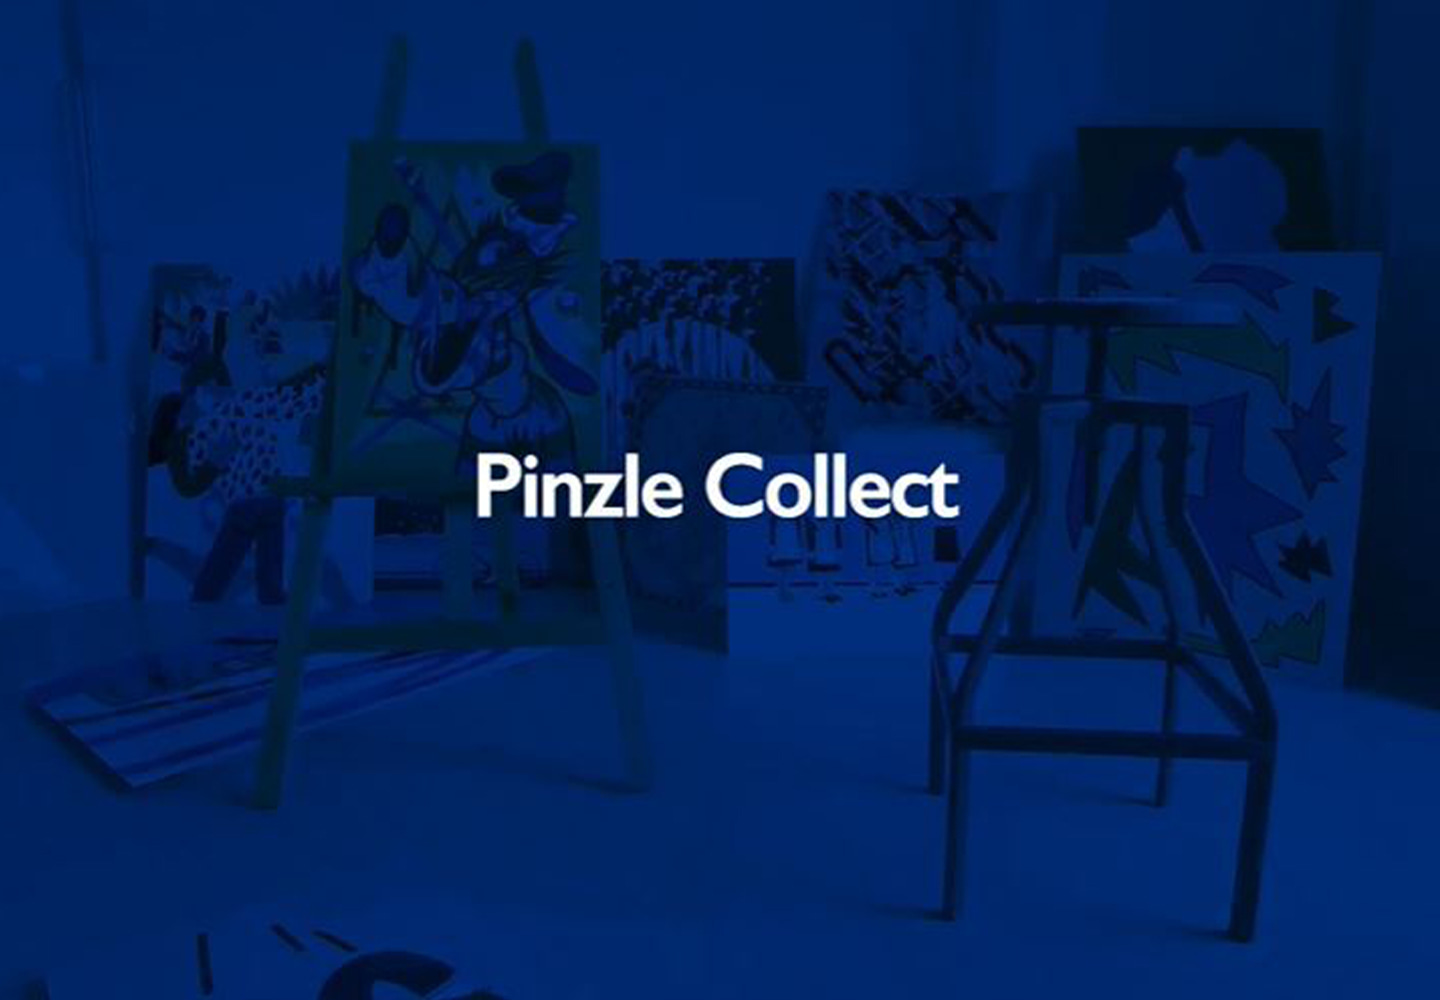 &#039;PINZLE COLLECT&#039; by PINZLE